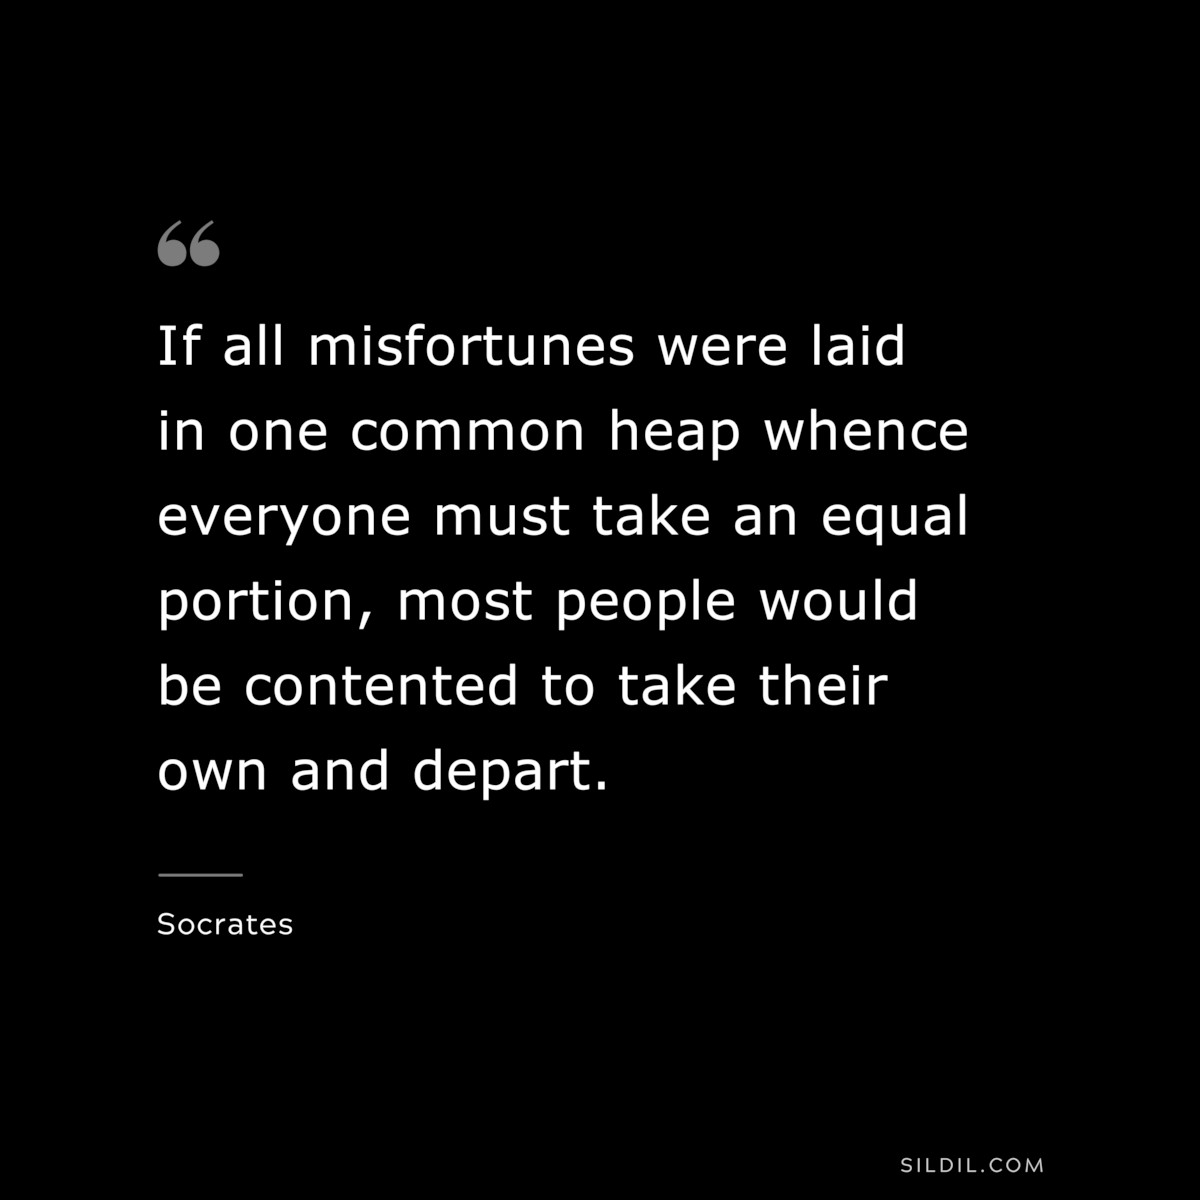 If all misfortunes were laid in one common heap whence everyone must take an equal portion, most people would be contented to take their own and depart. ― Socrates